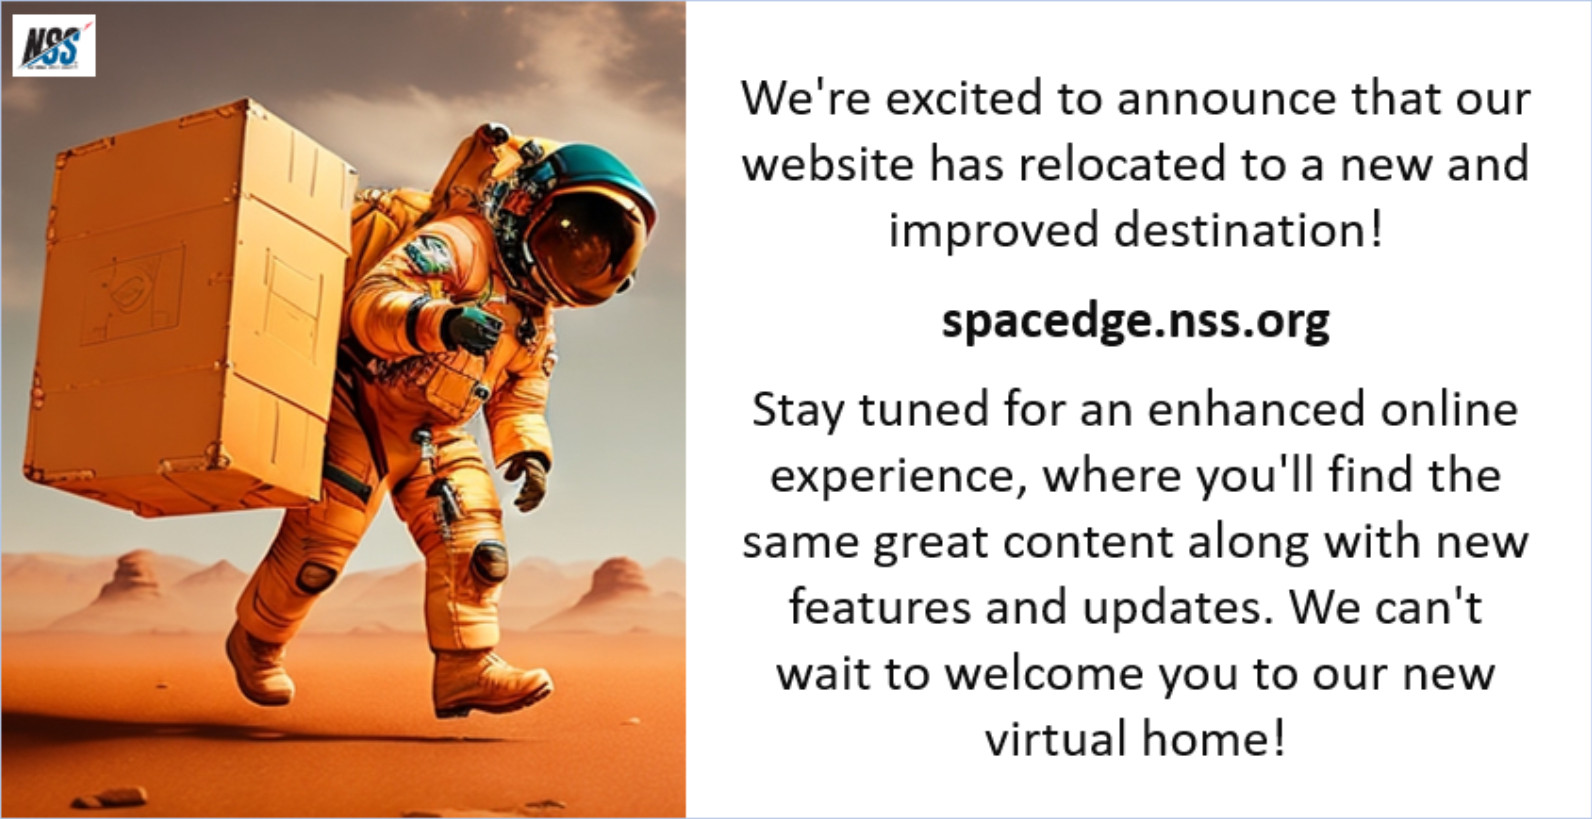 We're moving to our new website: https://spacedge.nss.org/